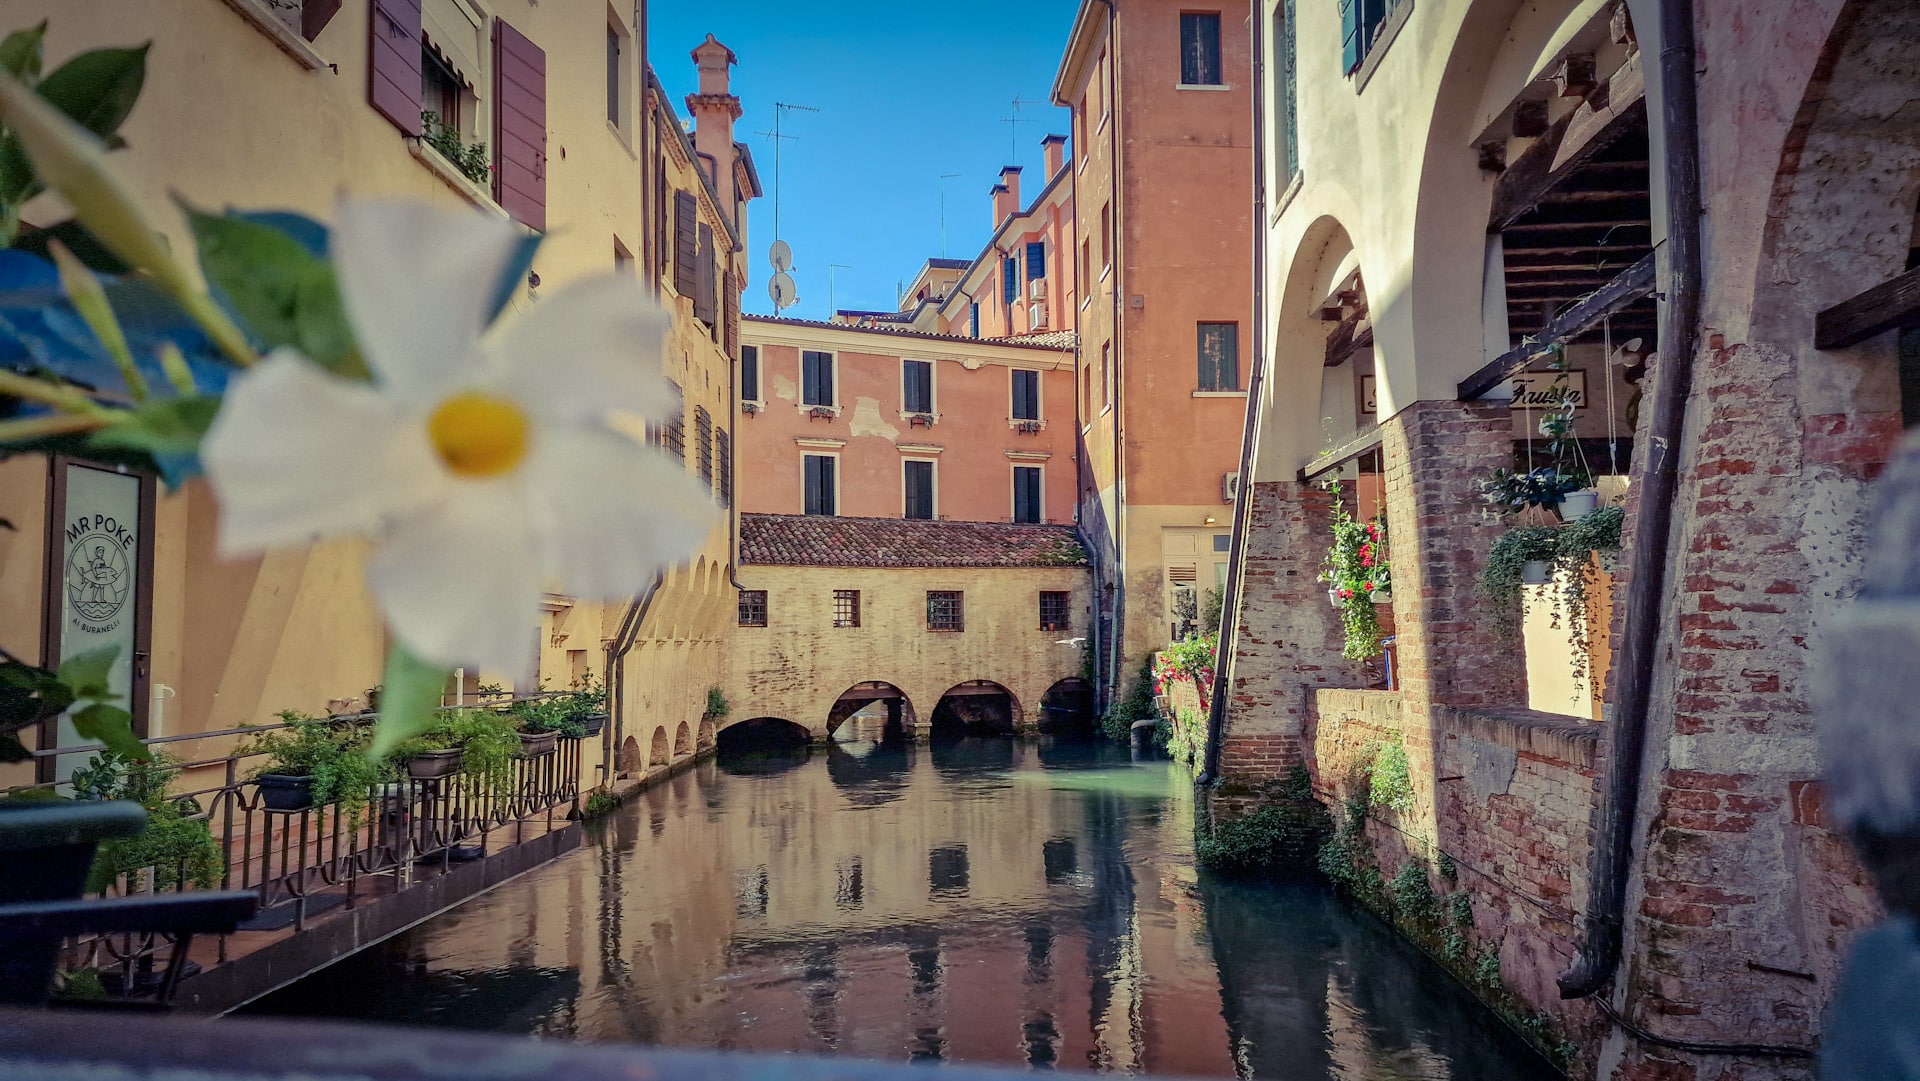 The Old Town of Treviso is a charming and picturesque area, perfect for those who want to explore the city's historical side